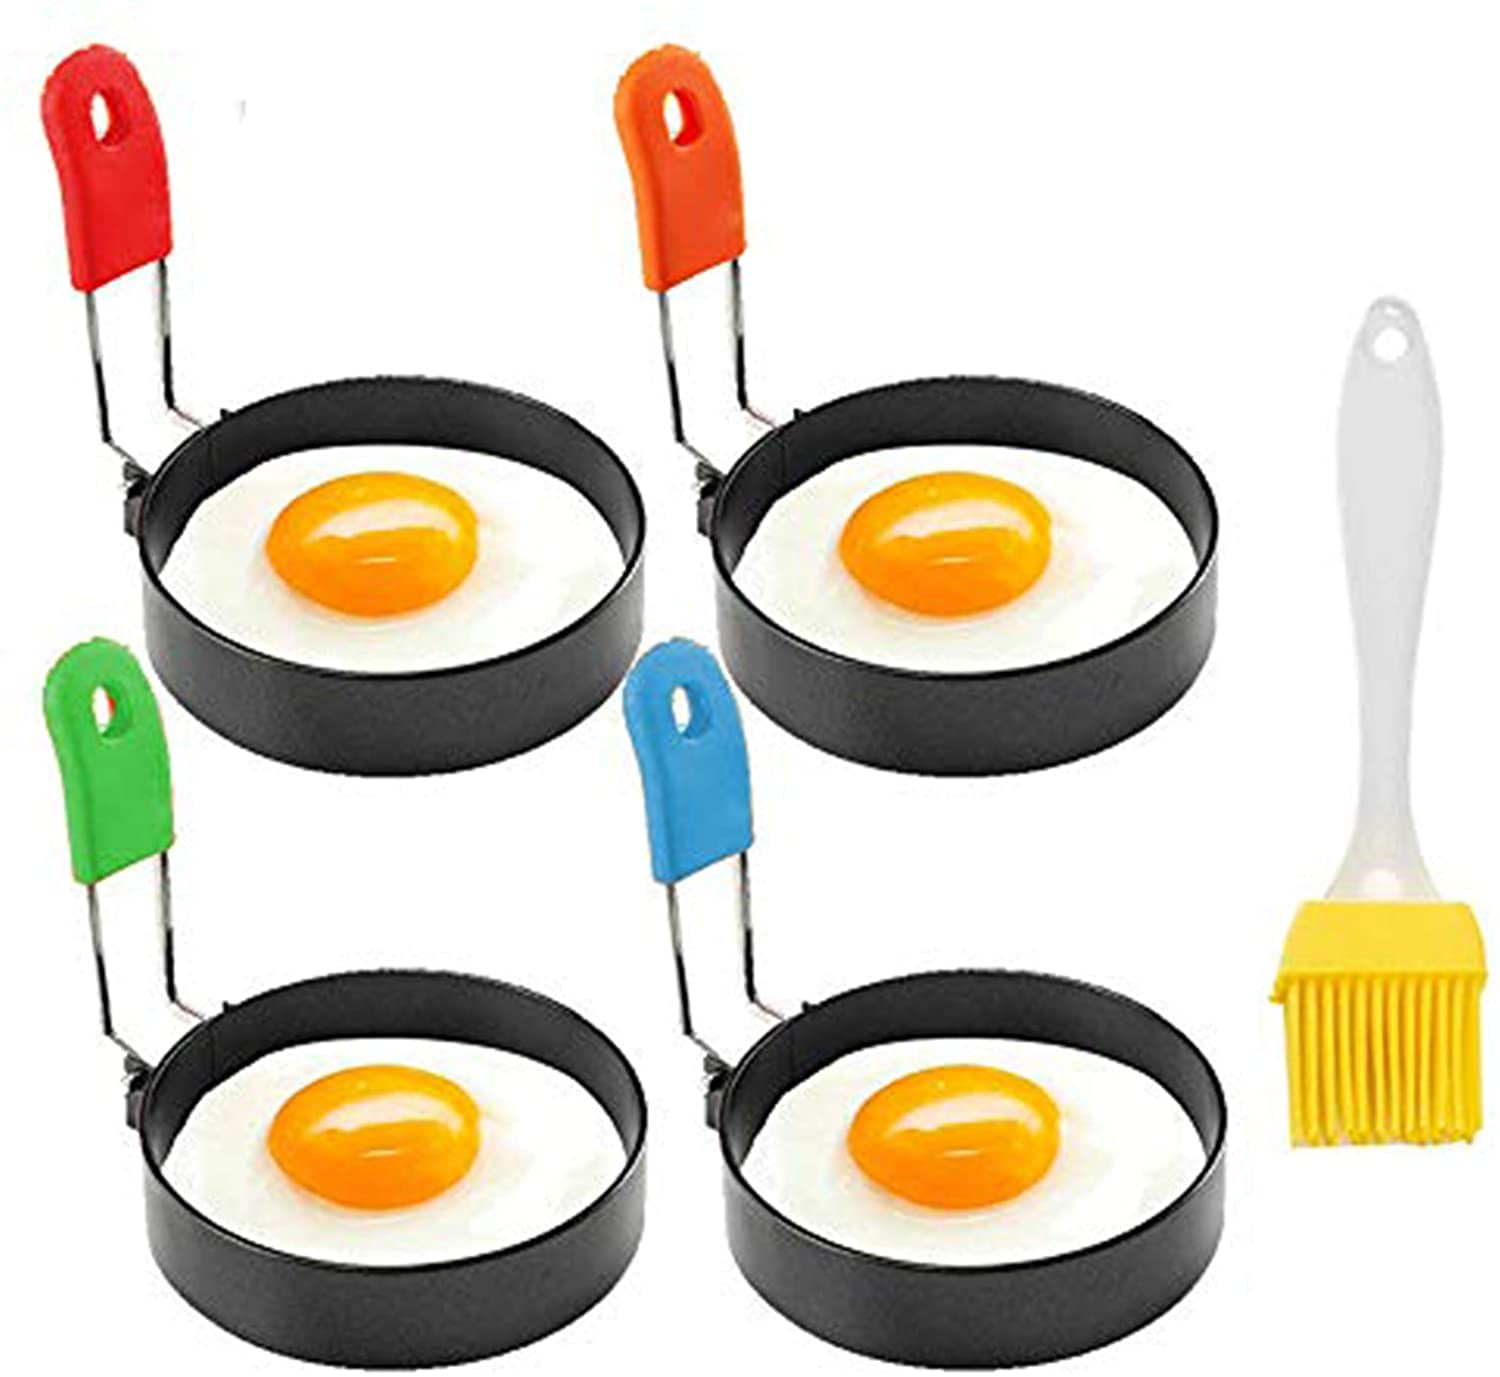 4 Pack Reusable Fried Egg Mold with an Oil Brush Yubng Egg Cooking Rings Egg Ring multi-shapes Silicone Ring for Eggs Round Pancake Mold 